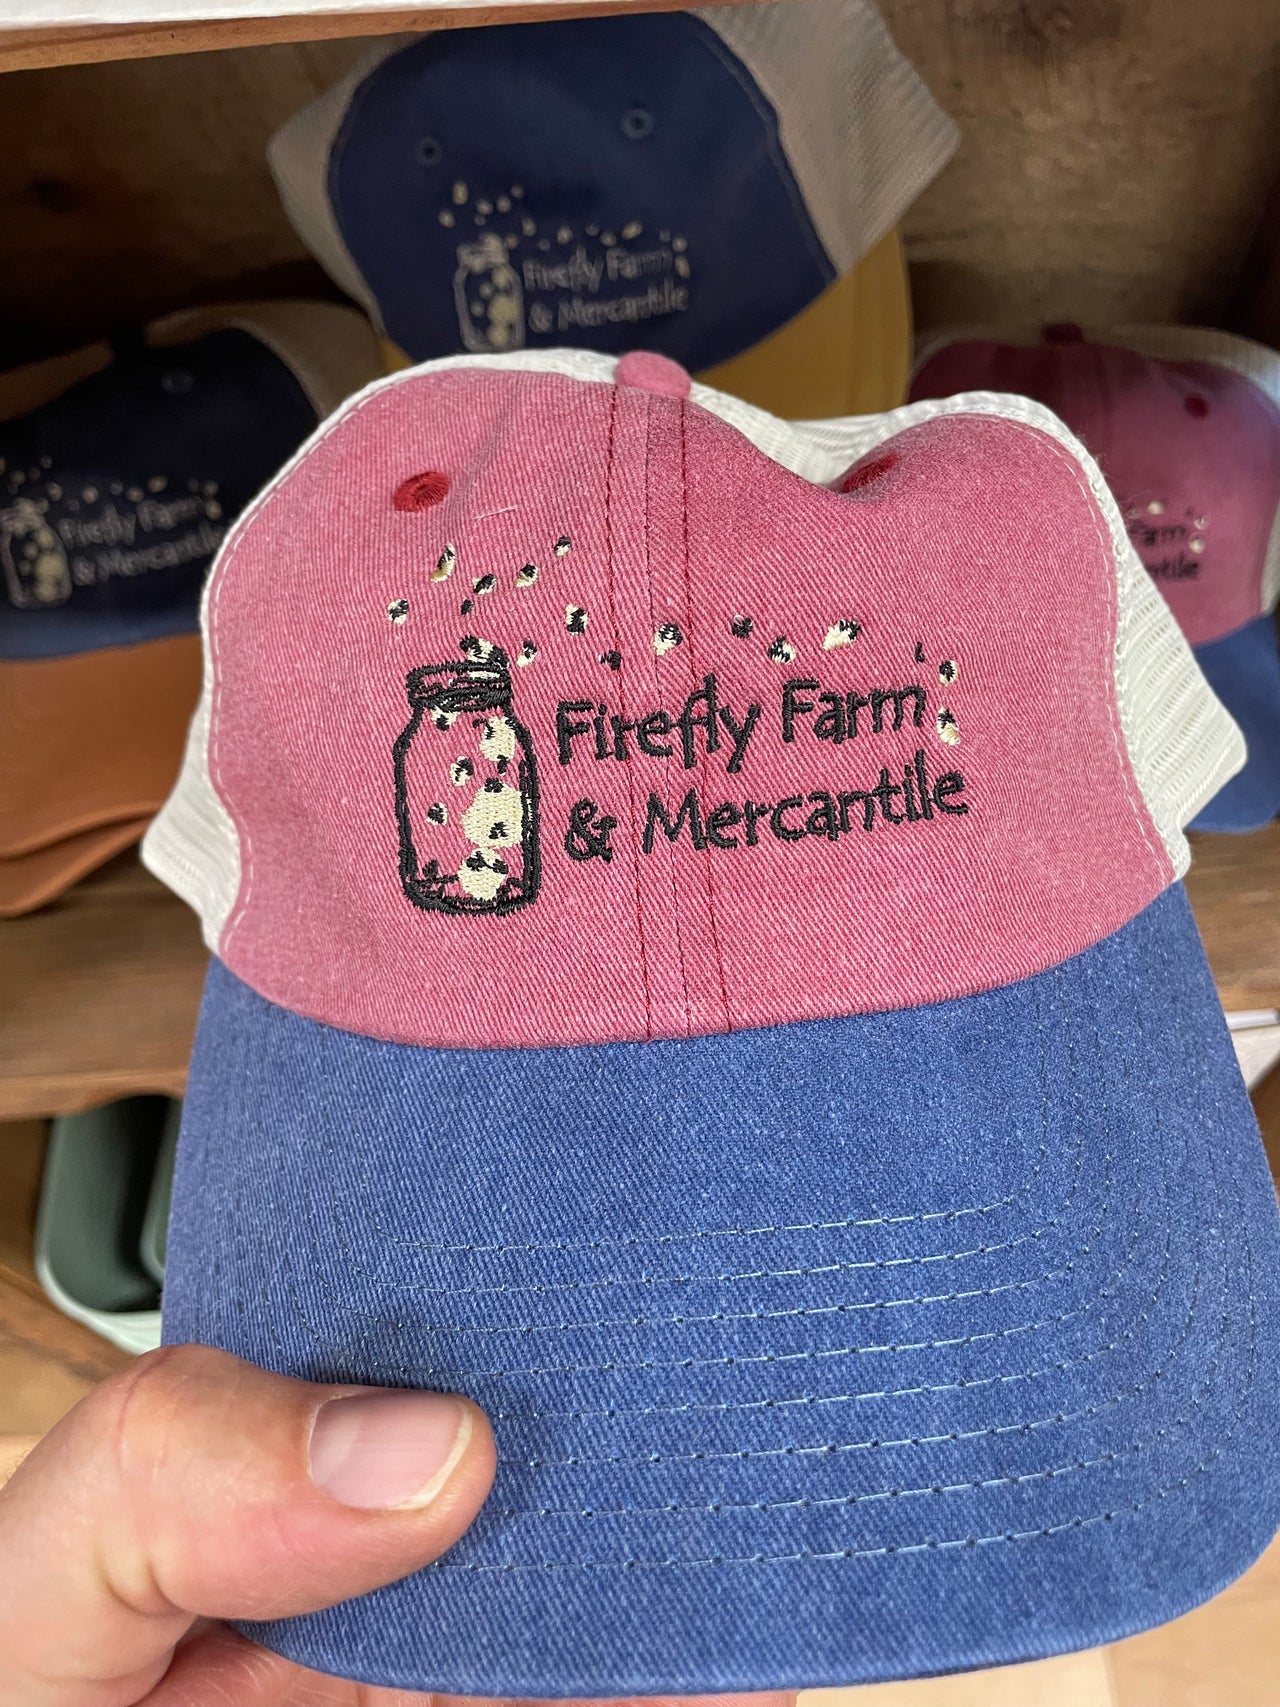 Firefly Farm & Mercantile Trucker Style Hat, Unstructured Fit